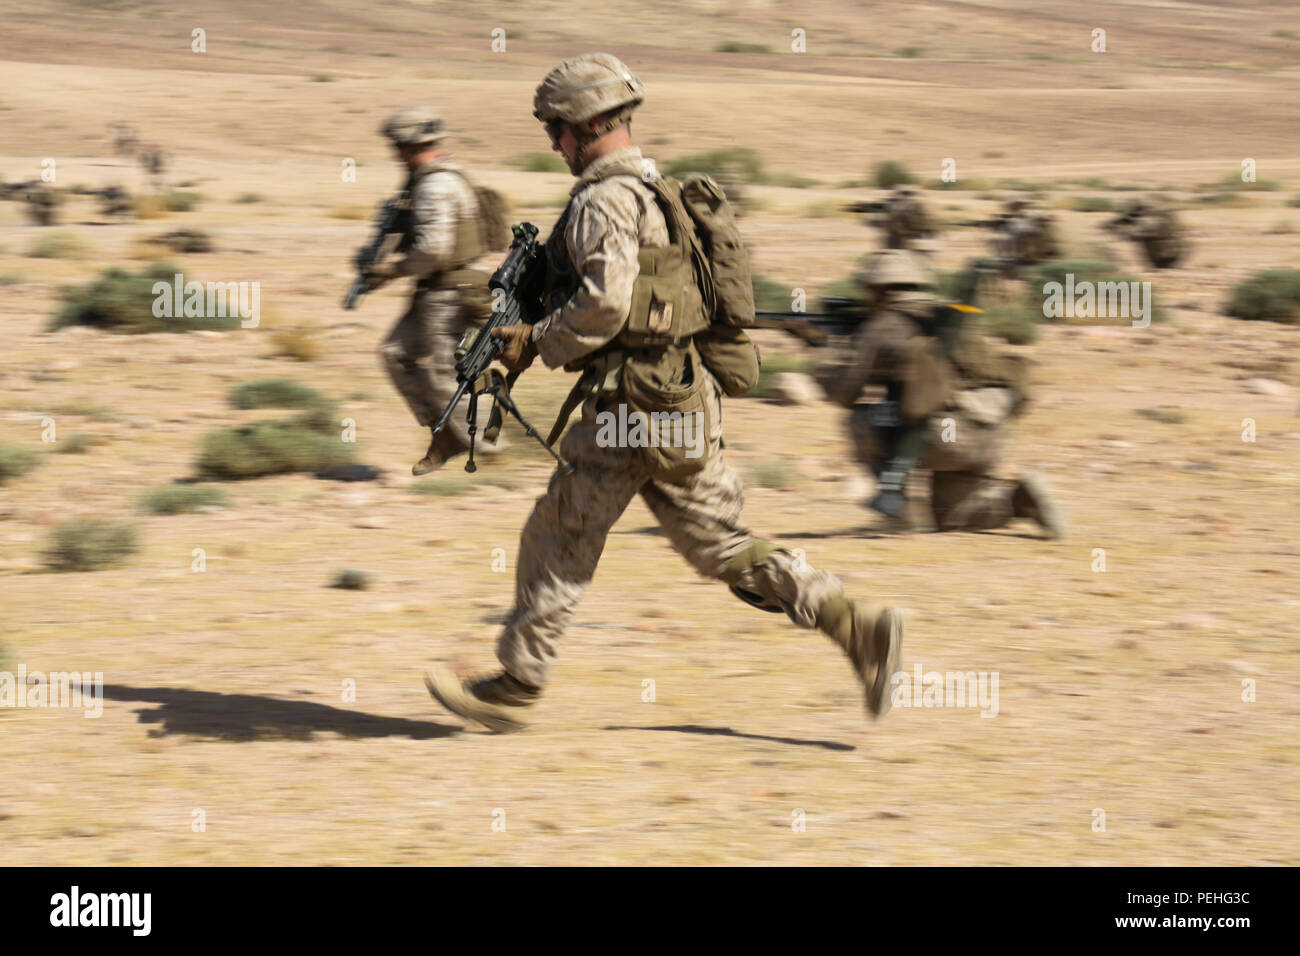 Southwest Asia (Aug. 18, 2015) U.S. Marine Lance Cpl. Robert Hole rushes with his fellow Marines while simulating a squad attack during sustainment training. Hole is a team leader with India Company, Battalion Landing Team 3rd Battalion, 1st Marine Regiment, 15th Marine Expeditionary Unit.  The 15th MEU, embarked aboard the ships of the Essex Amphibious Ready Group, is a forward-deployed, flexible sea-based Marine air-ground task force capable of engaging with regional partners and contributing to regional security. (U.S. Marine Corps photo by Sgt. Jamean Berry/Released) Stock Photo